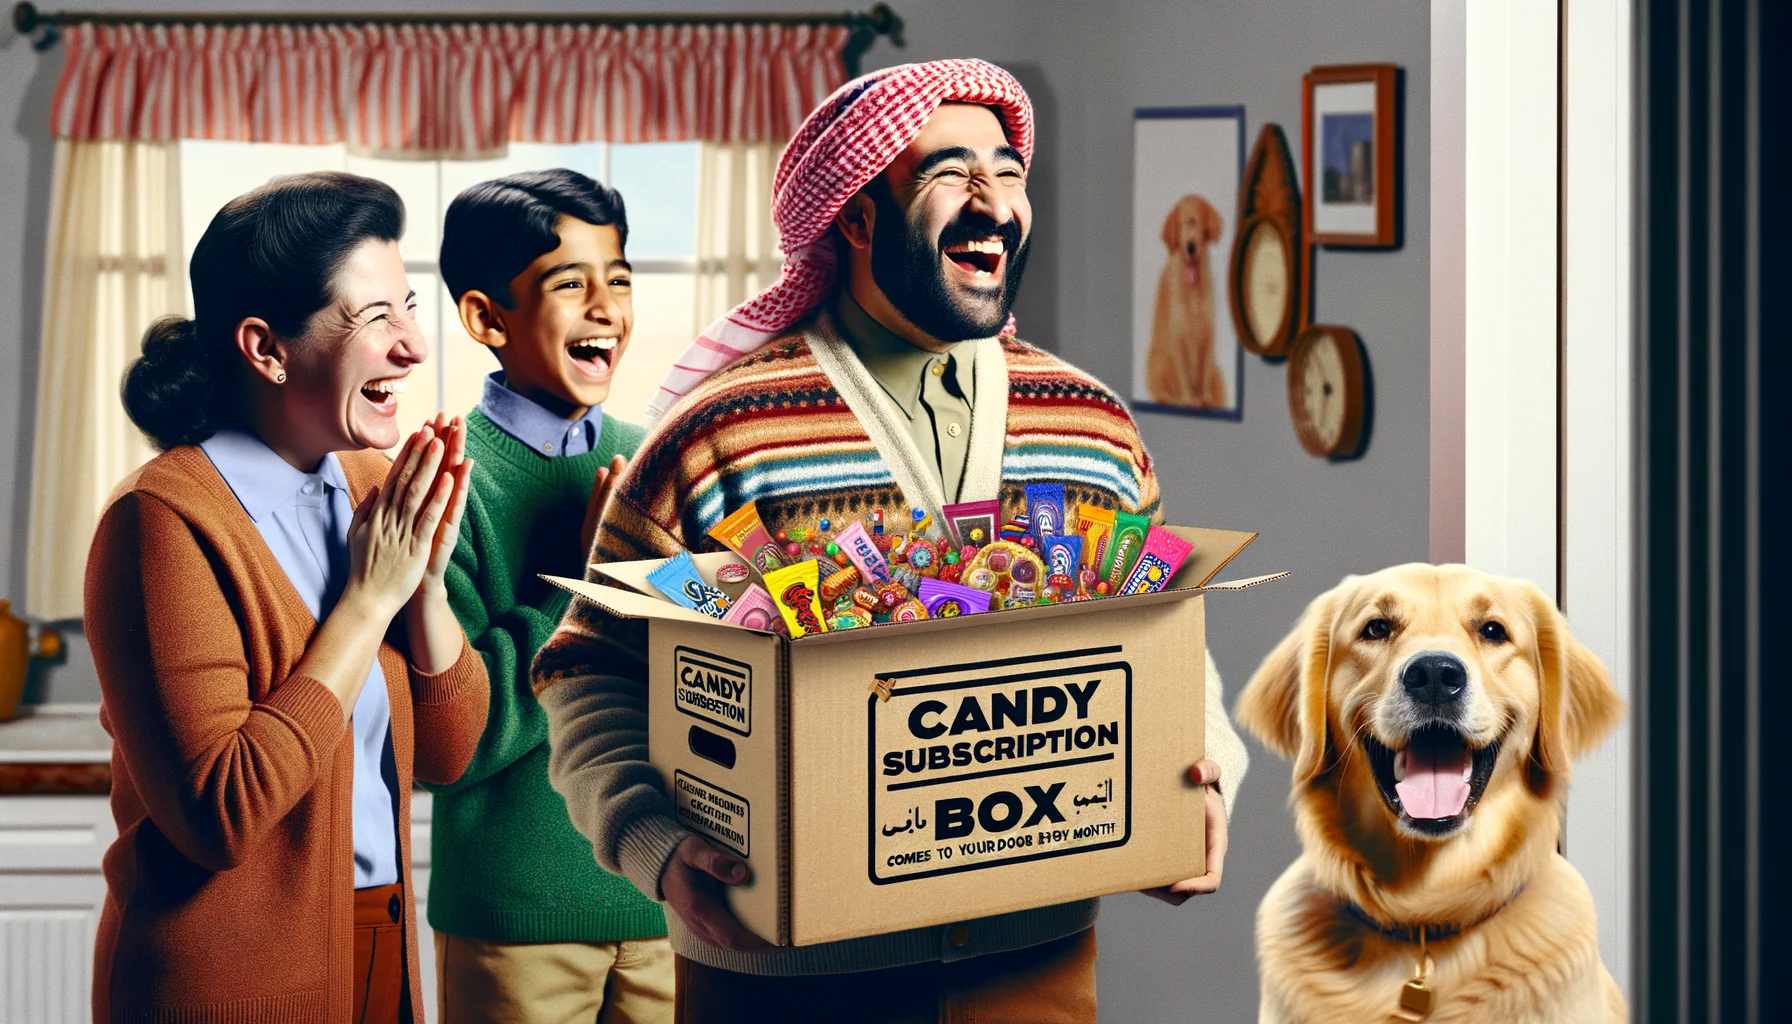 Imagine an amusing yet utterly realistic scenario depicting a 'Candy Subscription Box'. This candy-filled box comes to your door every month, packed to the brim with colorful candy from all around the world. Picture a scene where a family, featuring a Middle-Eastern father, Caucasian mother, and their Hispanic son eagerly waiting by their front door, expressions of anticipation and curiosity on their faces. Just then, their adorable Golden Retriever pet dog comes in, a box held carefully in its mouth. The printed label on it reads 'Candy Subscription Box', indicating their eagerly anticipated delivery. Their joyous laughter fills the air as they revel at the sight of their sweet monthly wonder.